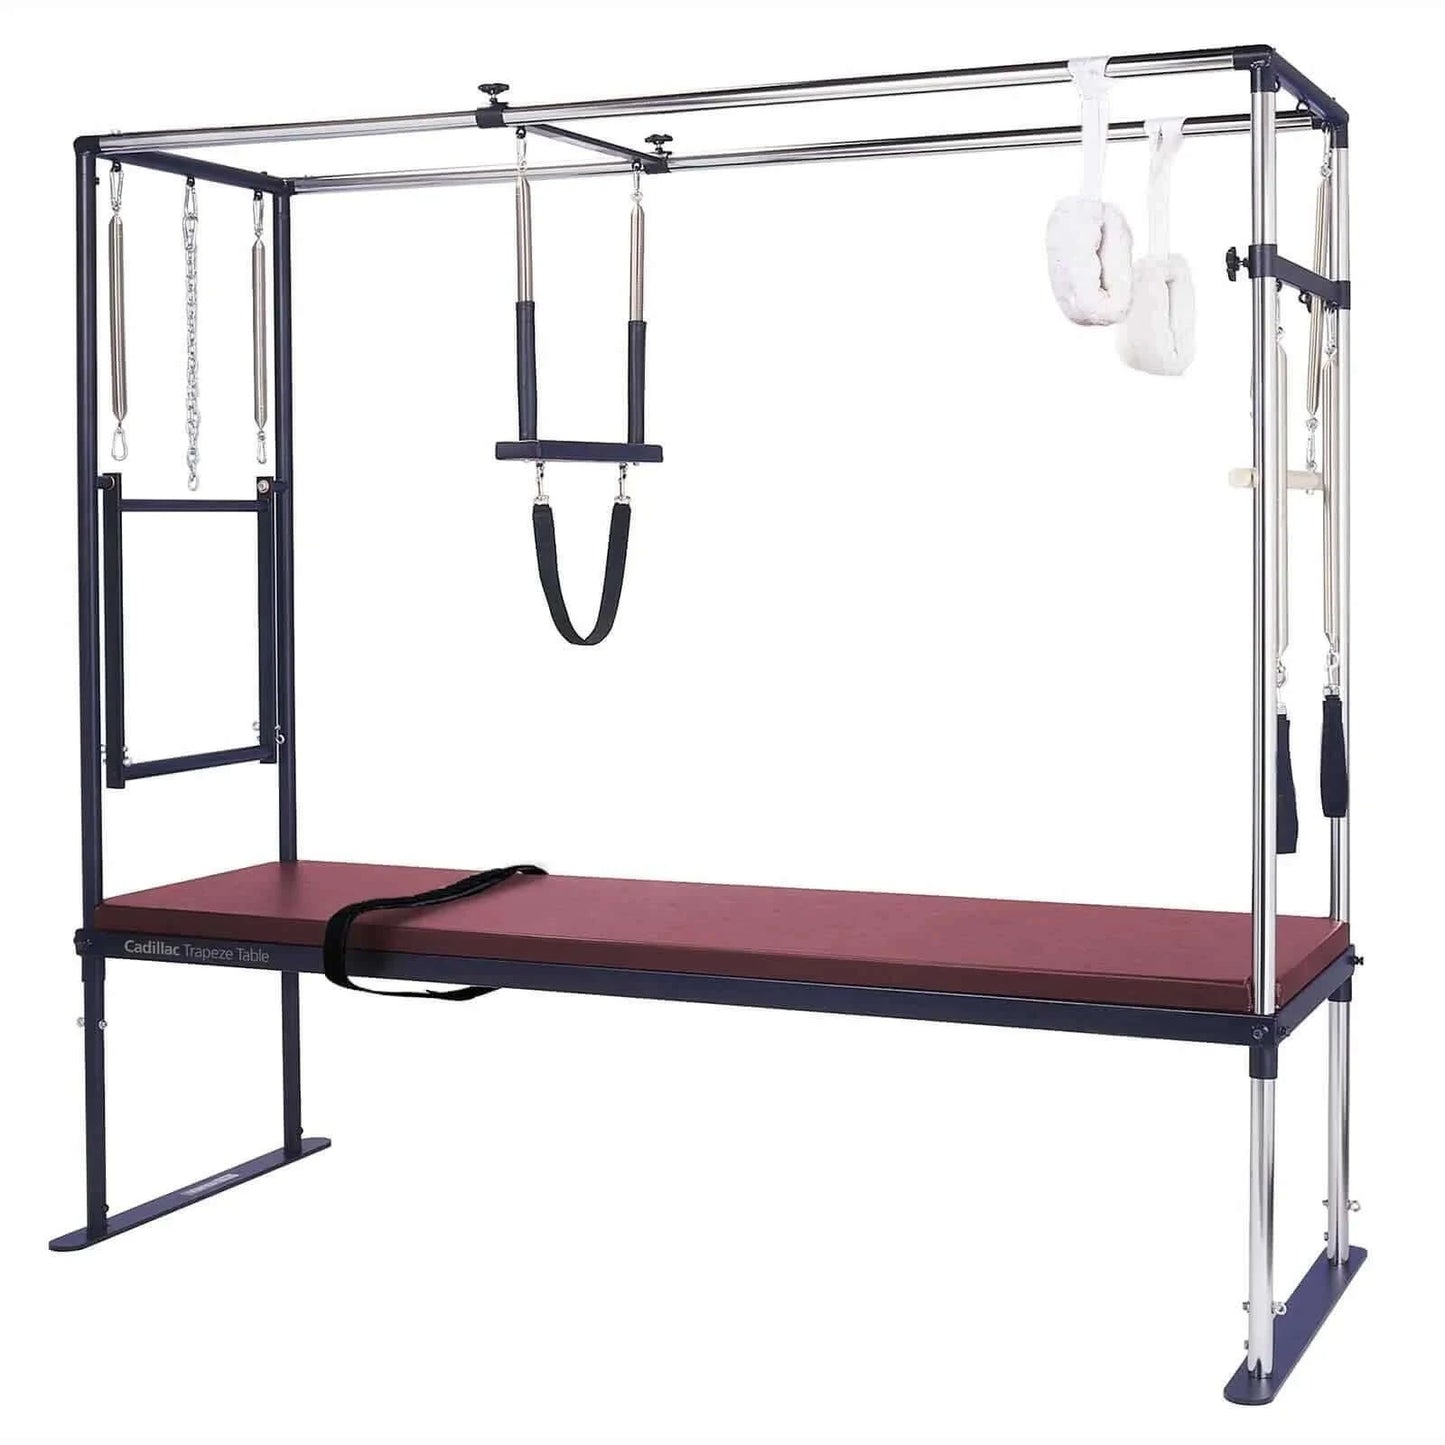 Red Truffle Merrithew™ Pilates Cadillac / Trapeze Table by Merrithew™ sold by Pilates Matters® by BSP LLC